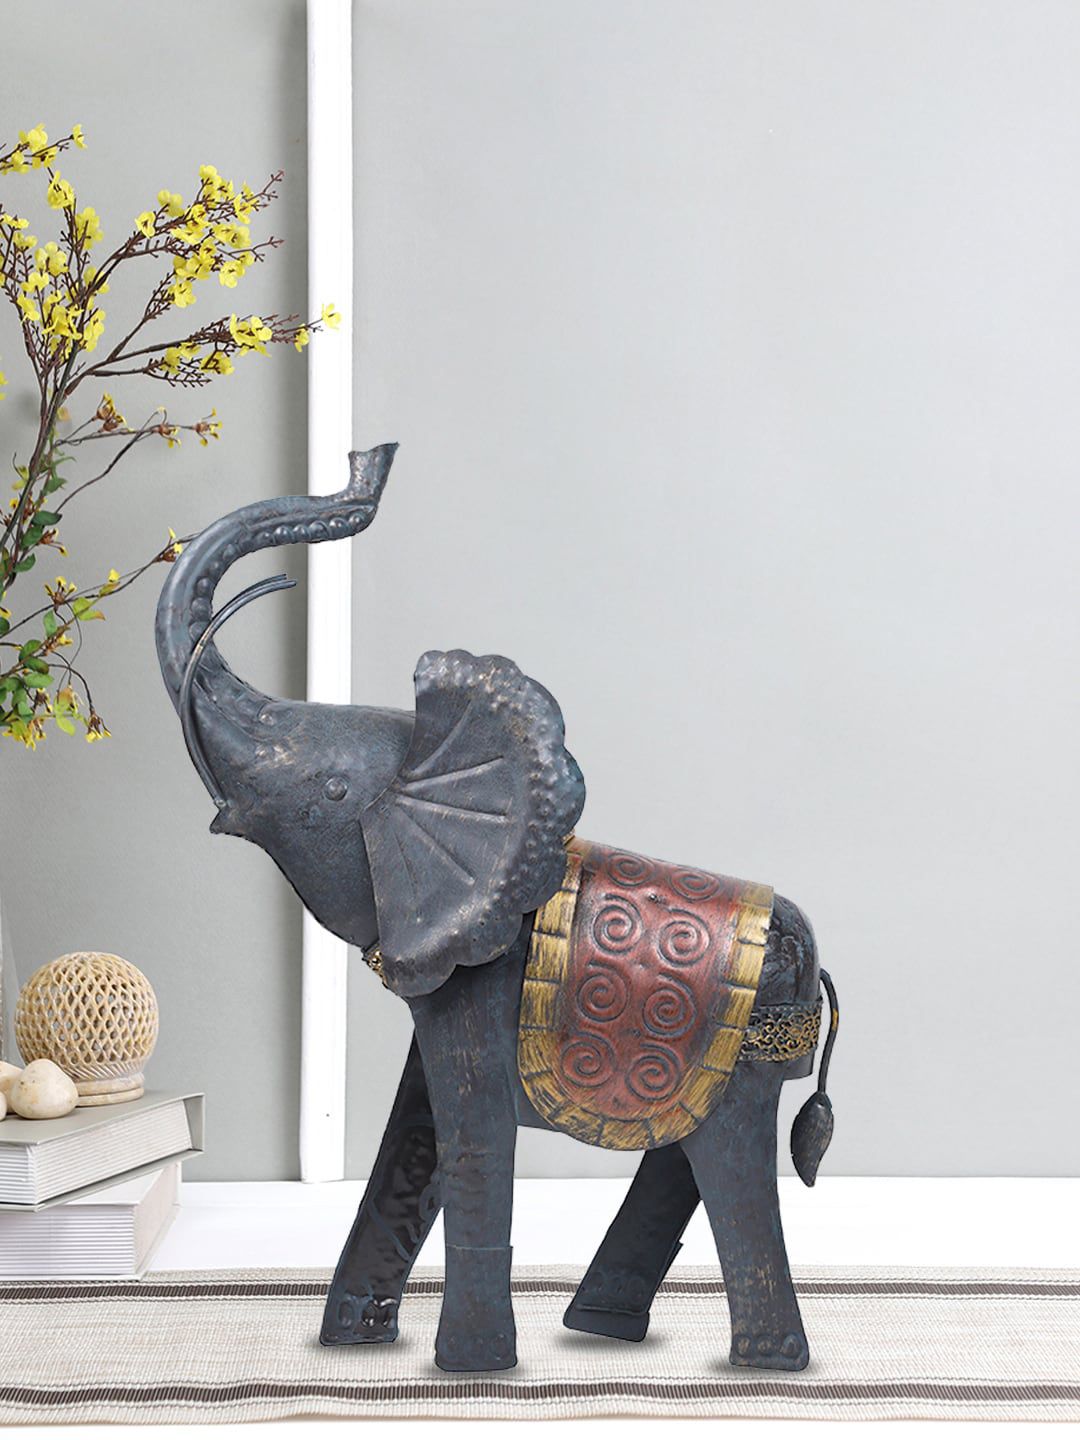 Aapno Rajasthan Black Textured Elephant Table Decor Price in India